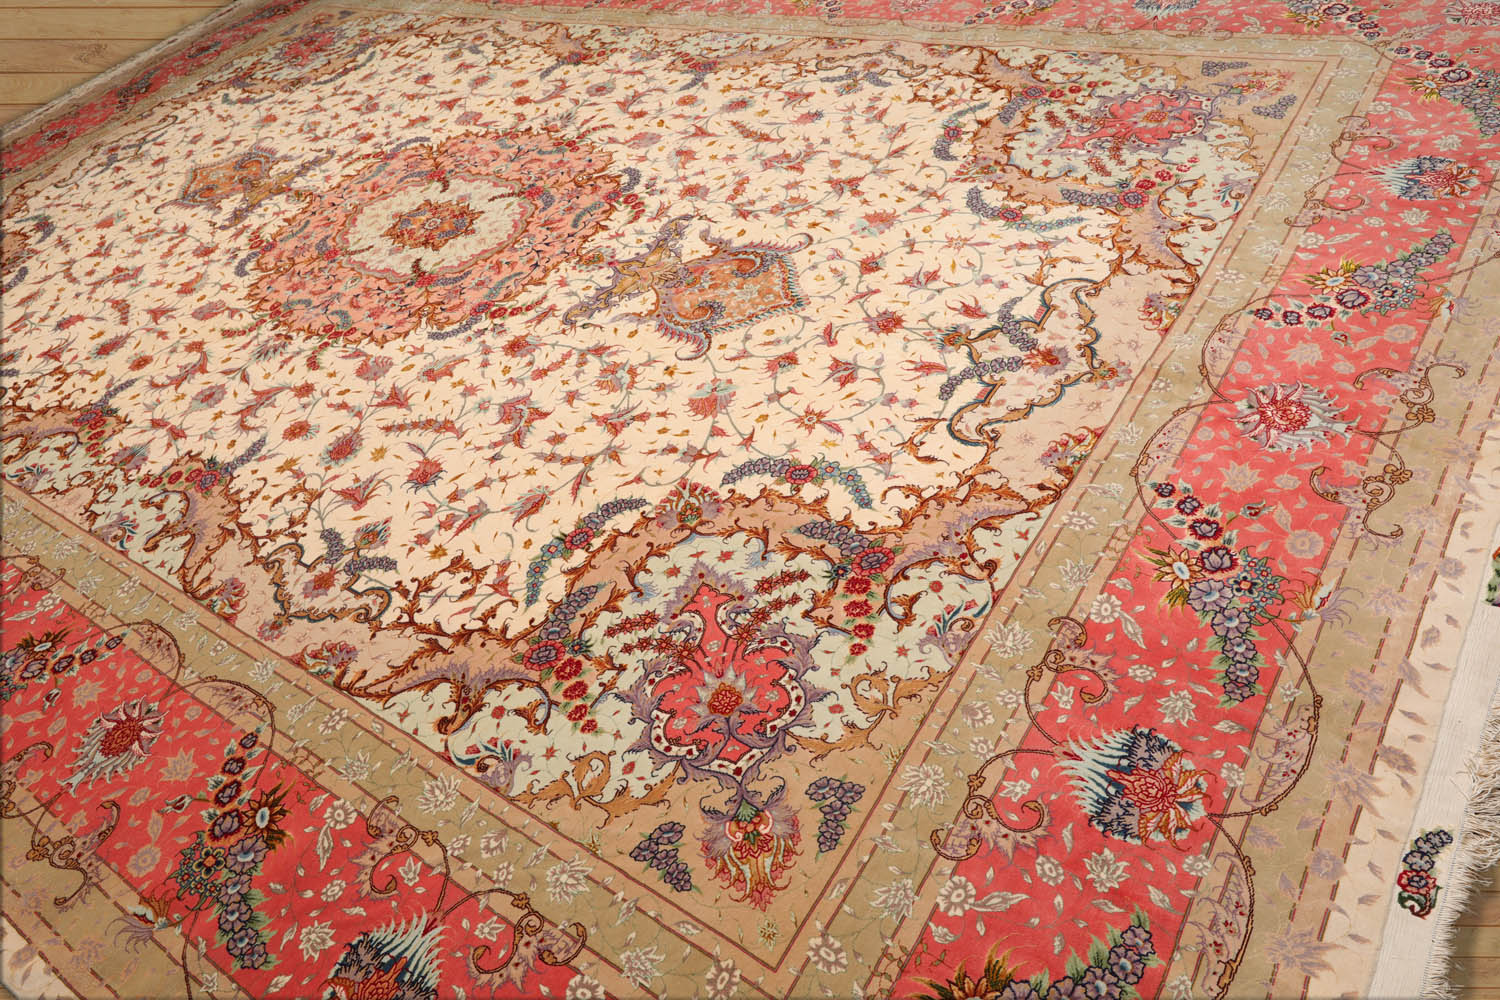 Annunciato Palace Hand Knotted Wool and Silk Traditional Palace Tabriz 350 KPSI Master Weaver Signed Oriental Area Rug Ivory, Rose Color